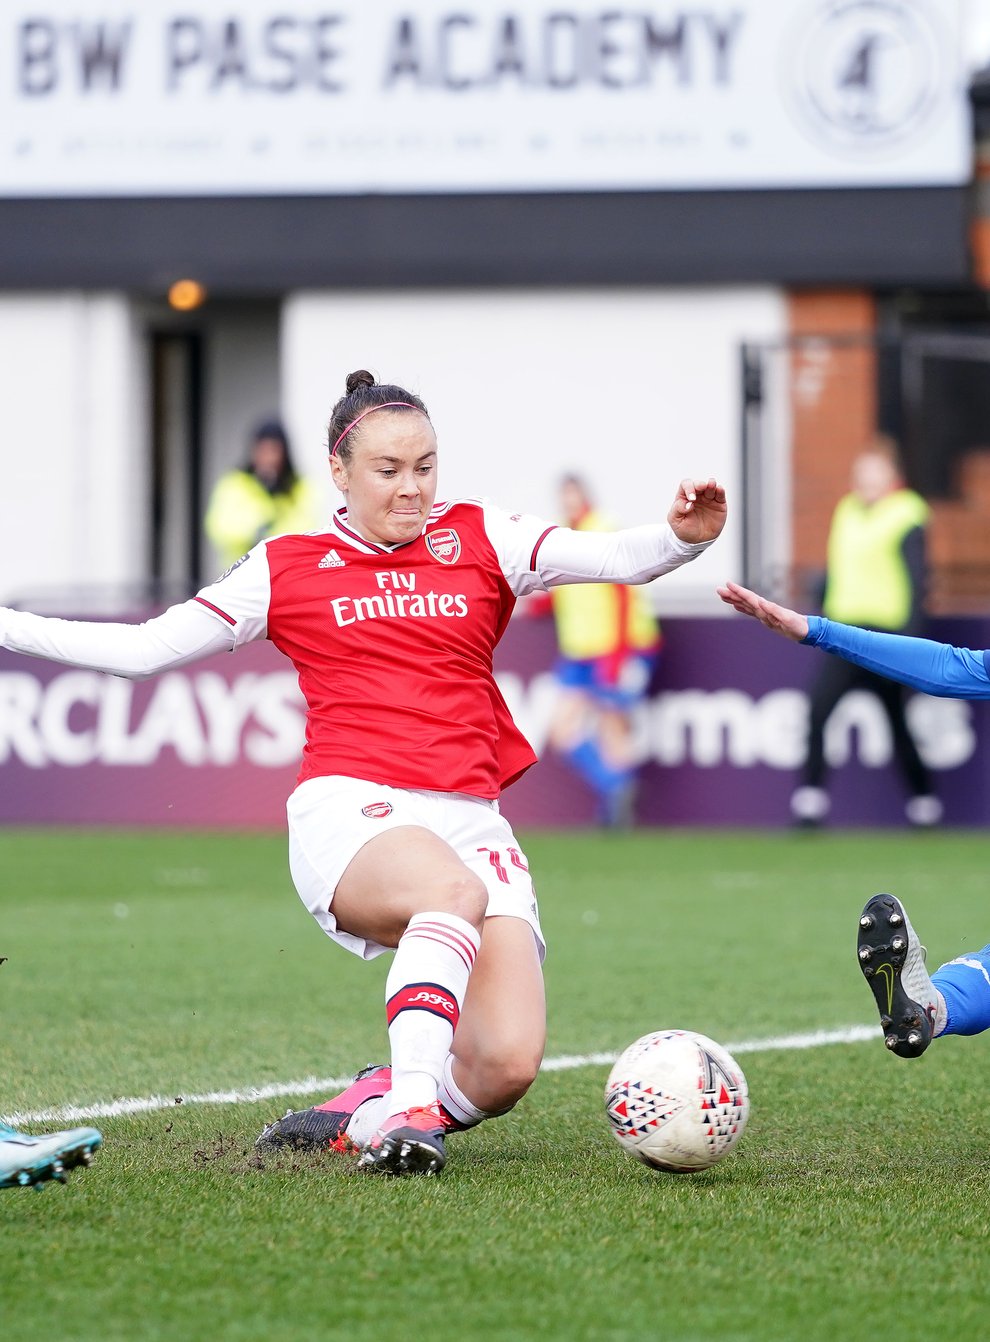 Foord scored on her debut for Arsenal (PA Images)